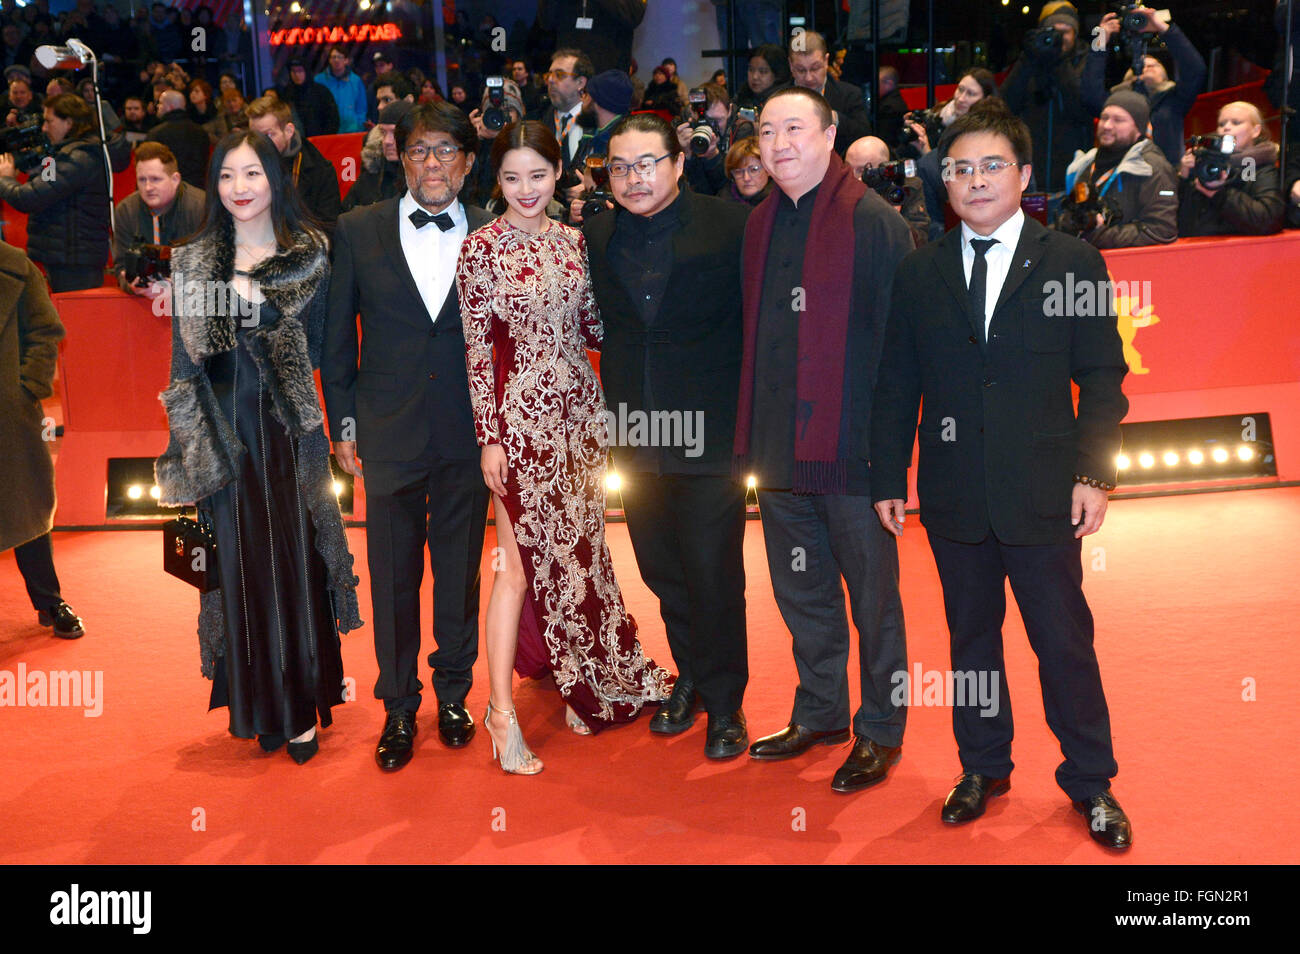 Mark Lee Ping-Bing (2nd L-cameraman of 'Chang Jiang Tu' awarded Silver Bear for Outstanding Artistic Contribution), Xin Zhi Lei (3rd L), director Yang Chao (3rd R) attending the Award Ceremony of the 66th Berlin International Film Festival / Berlinale 2016 at Berlinale Palast on February 20, 2016 in Berlin, Germany. Stock Photo